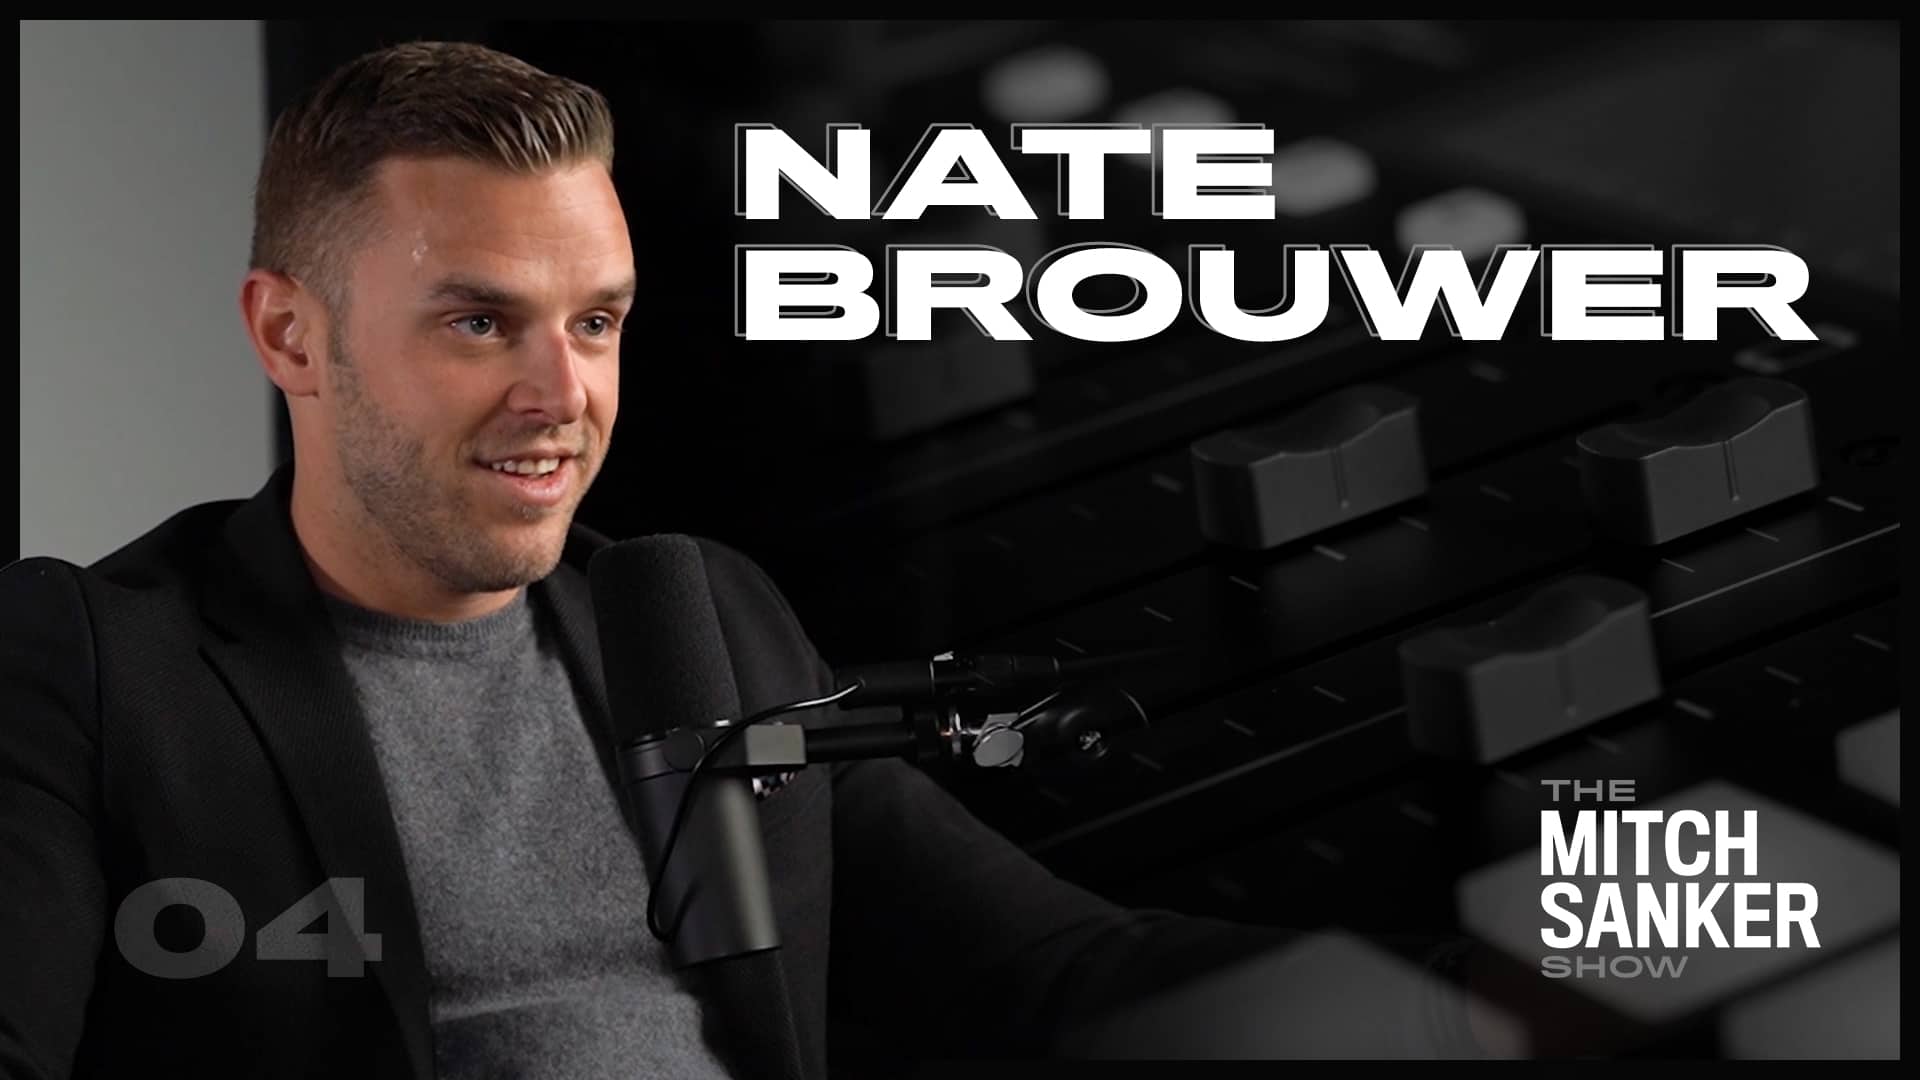 You are currently viewing The Mitch Sanker Show – Episode 04 featuring Nate Brouwer